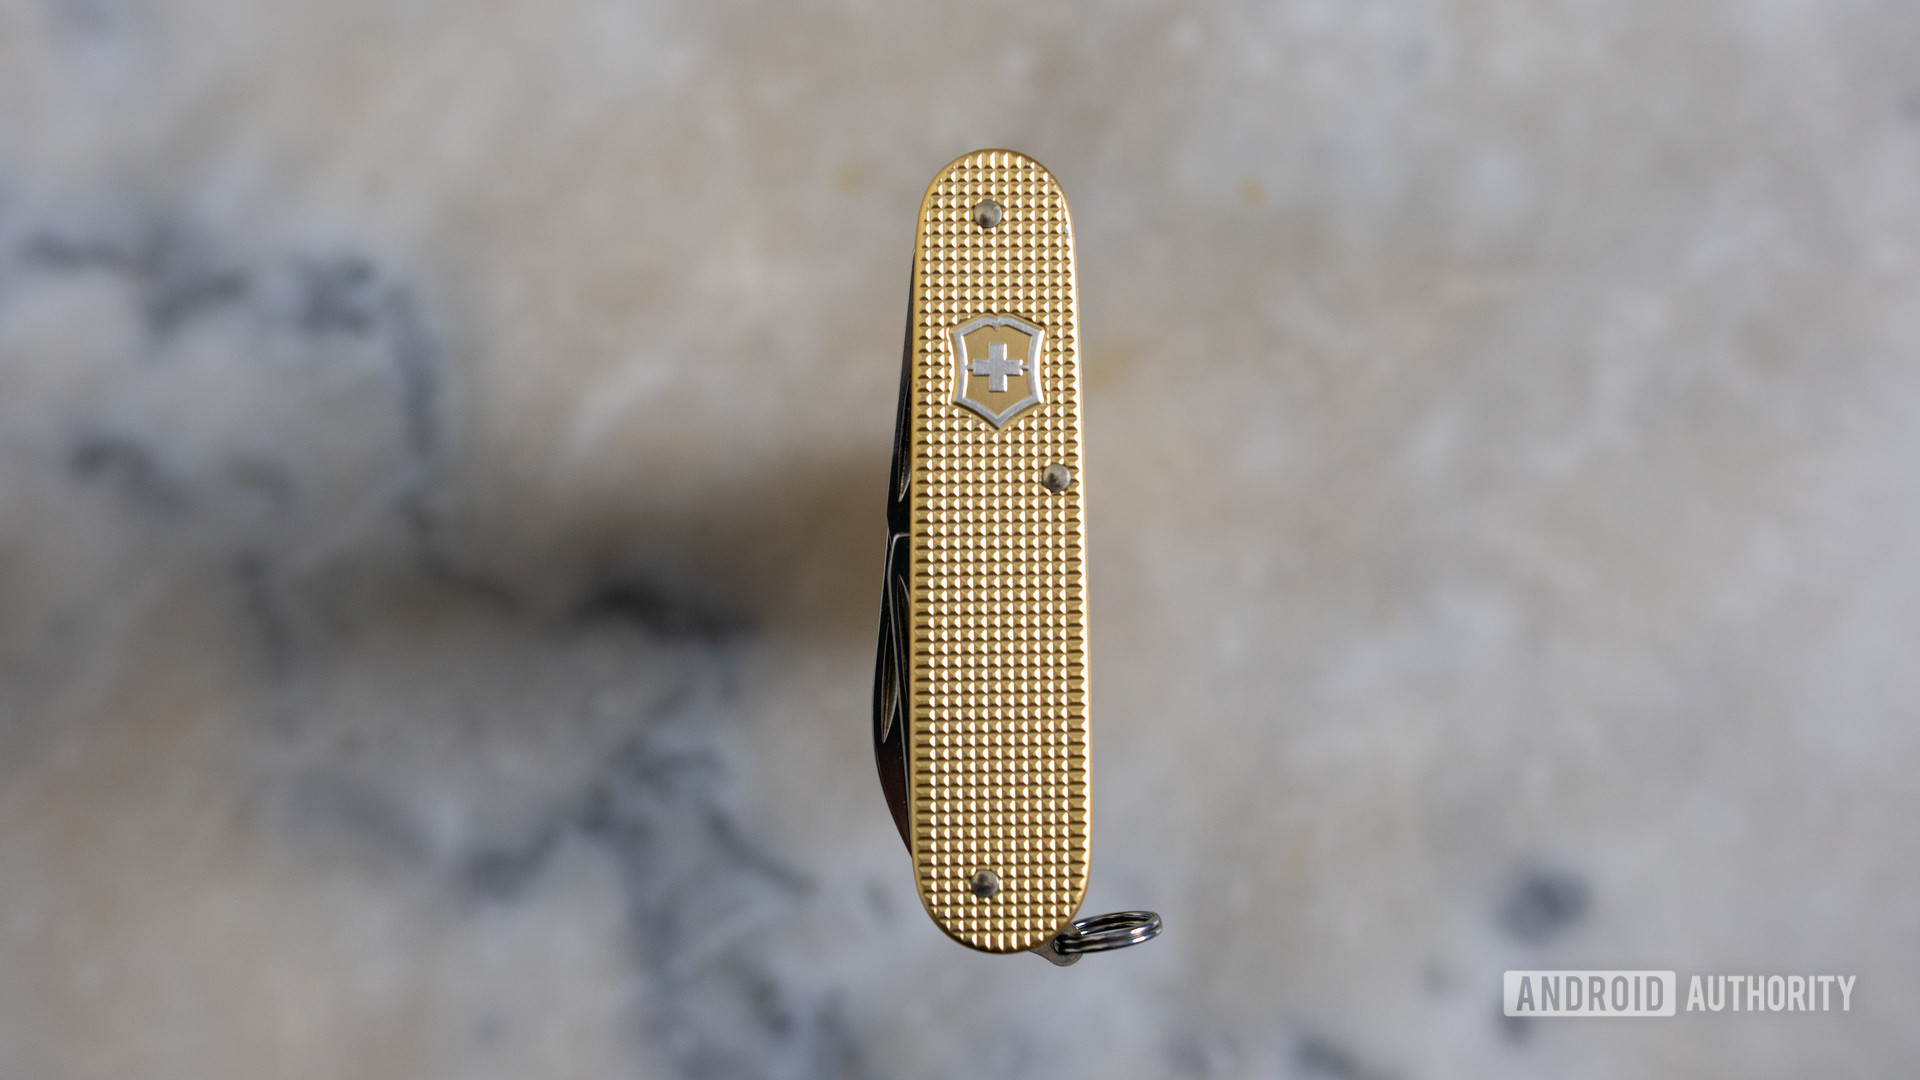 Gold Victorinox Cadet multitool on a marble table